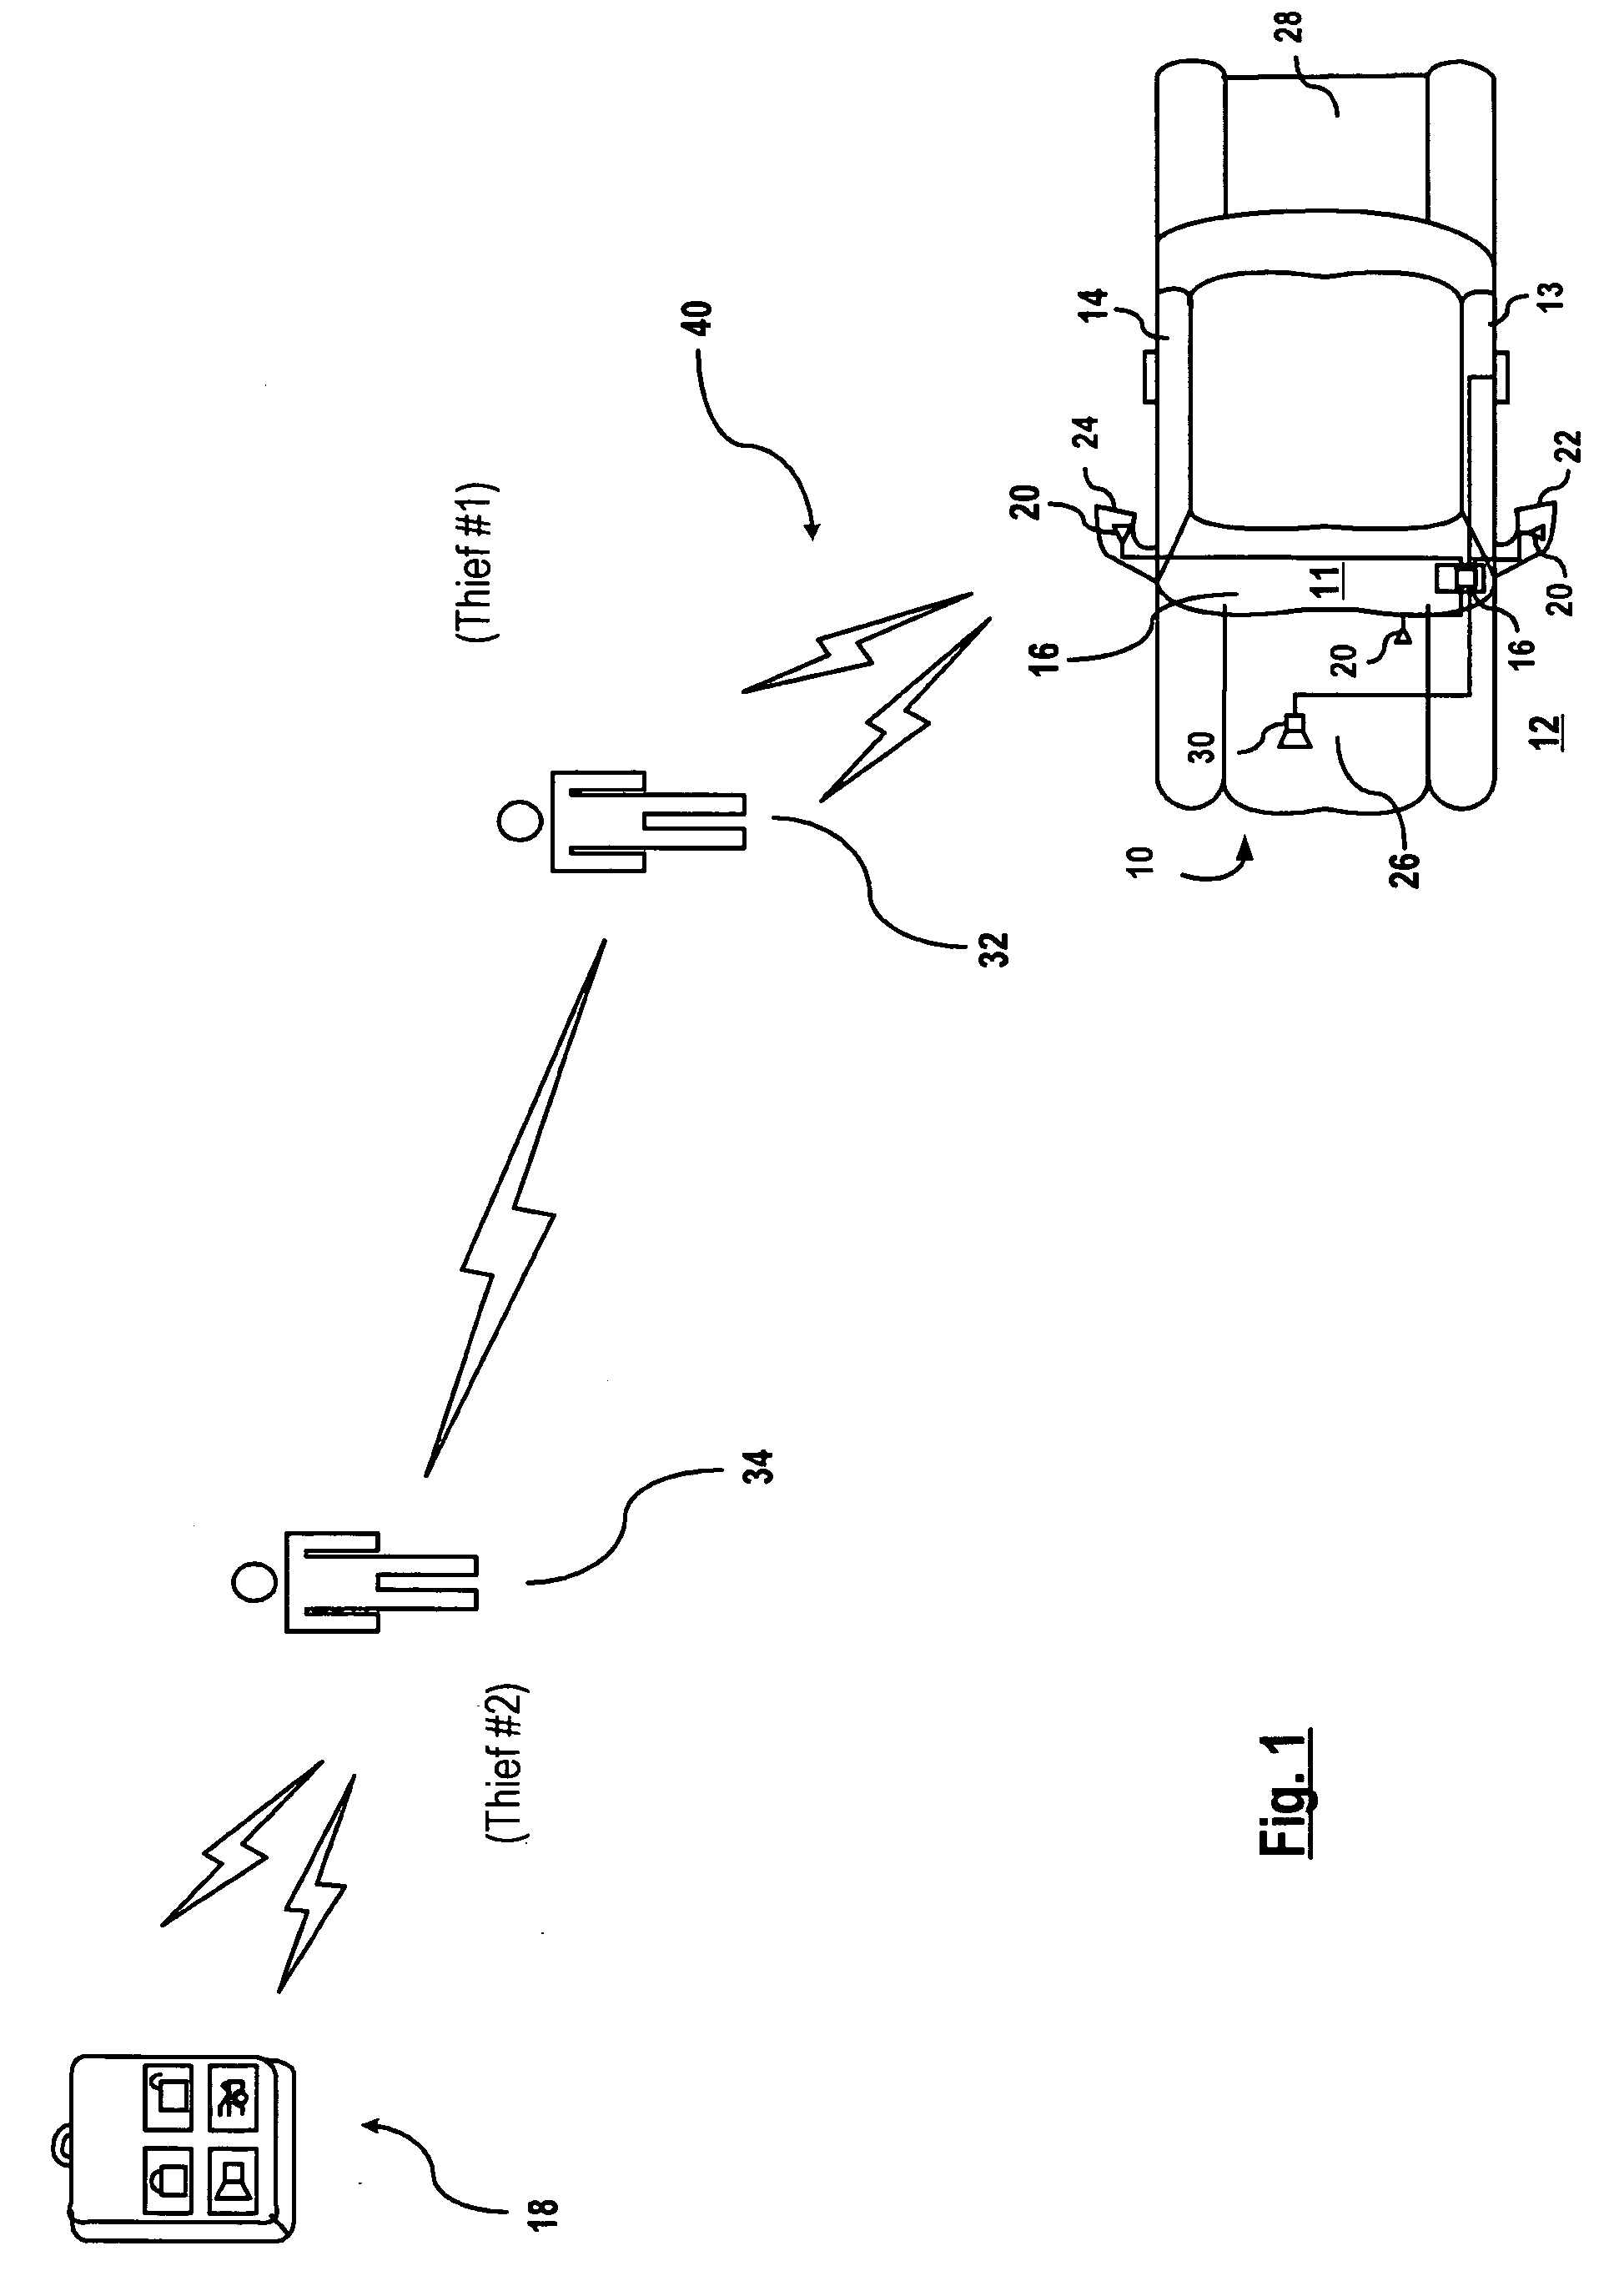 Method and apparatus for an anti-theft system against radio relay attack in passive keyless entry/start systems